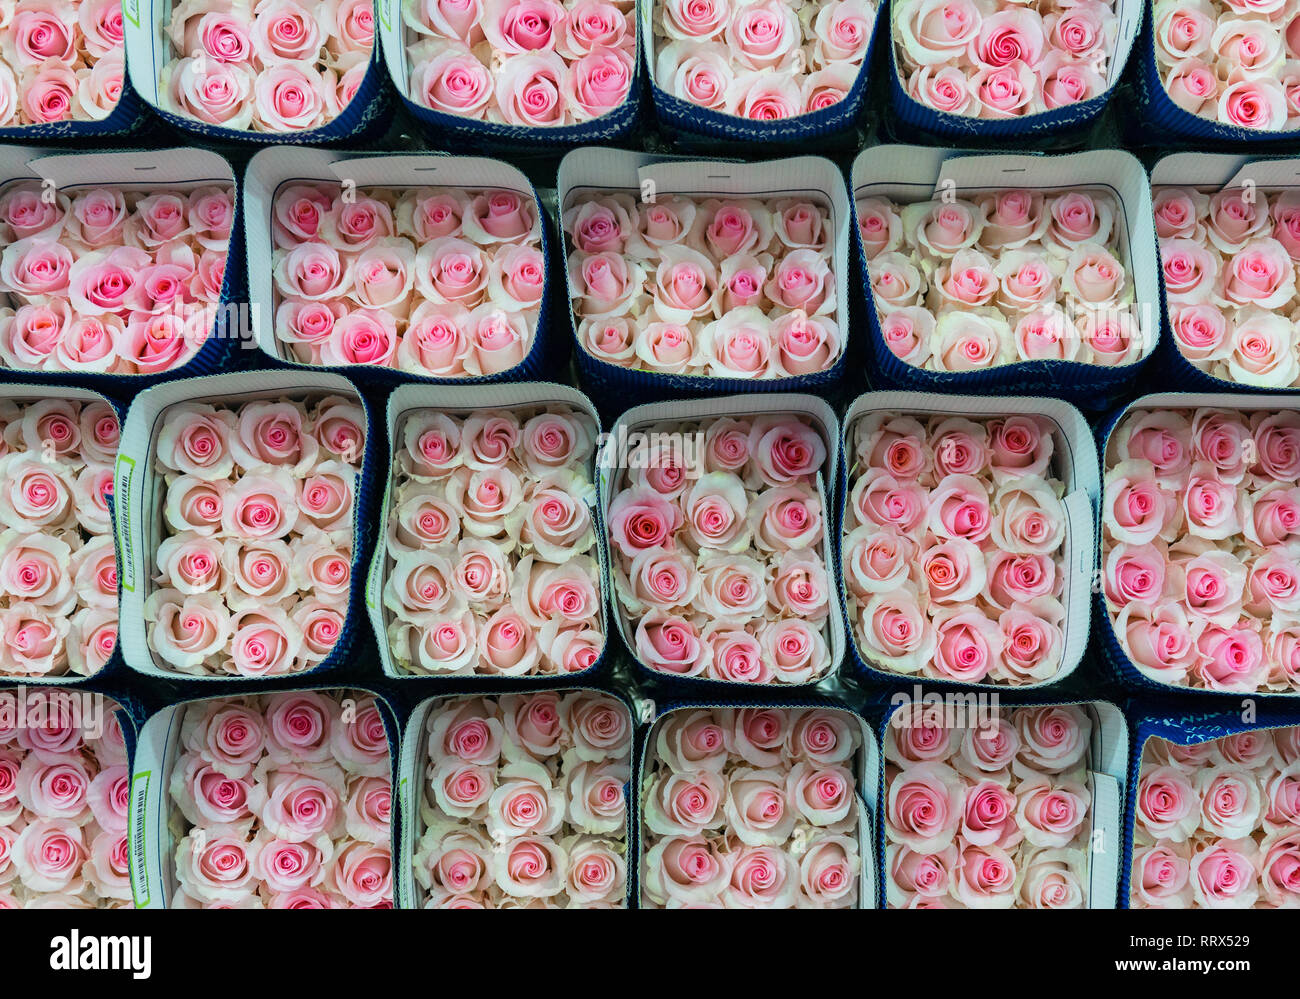 Pink roses packed for international export. The roses are produced in Tabacundo and Cayambe, north of Quito, Ecuador. Stock Photo